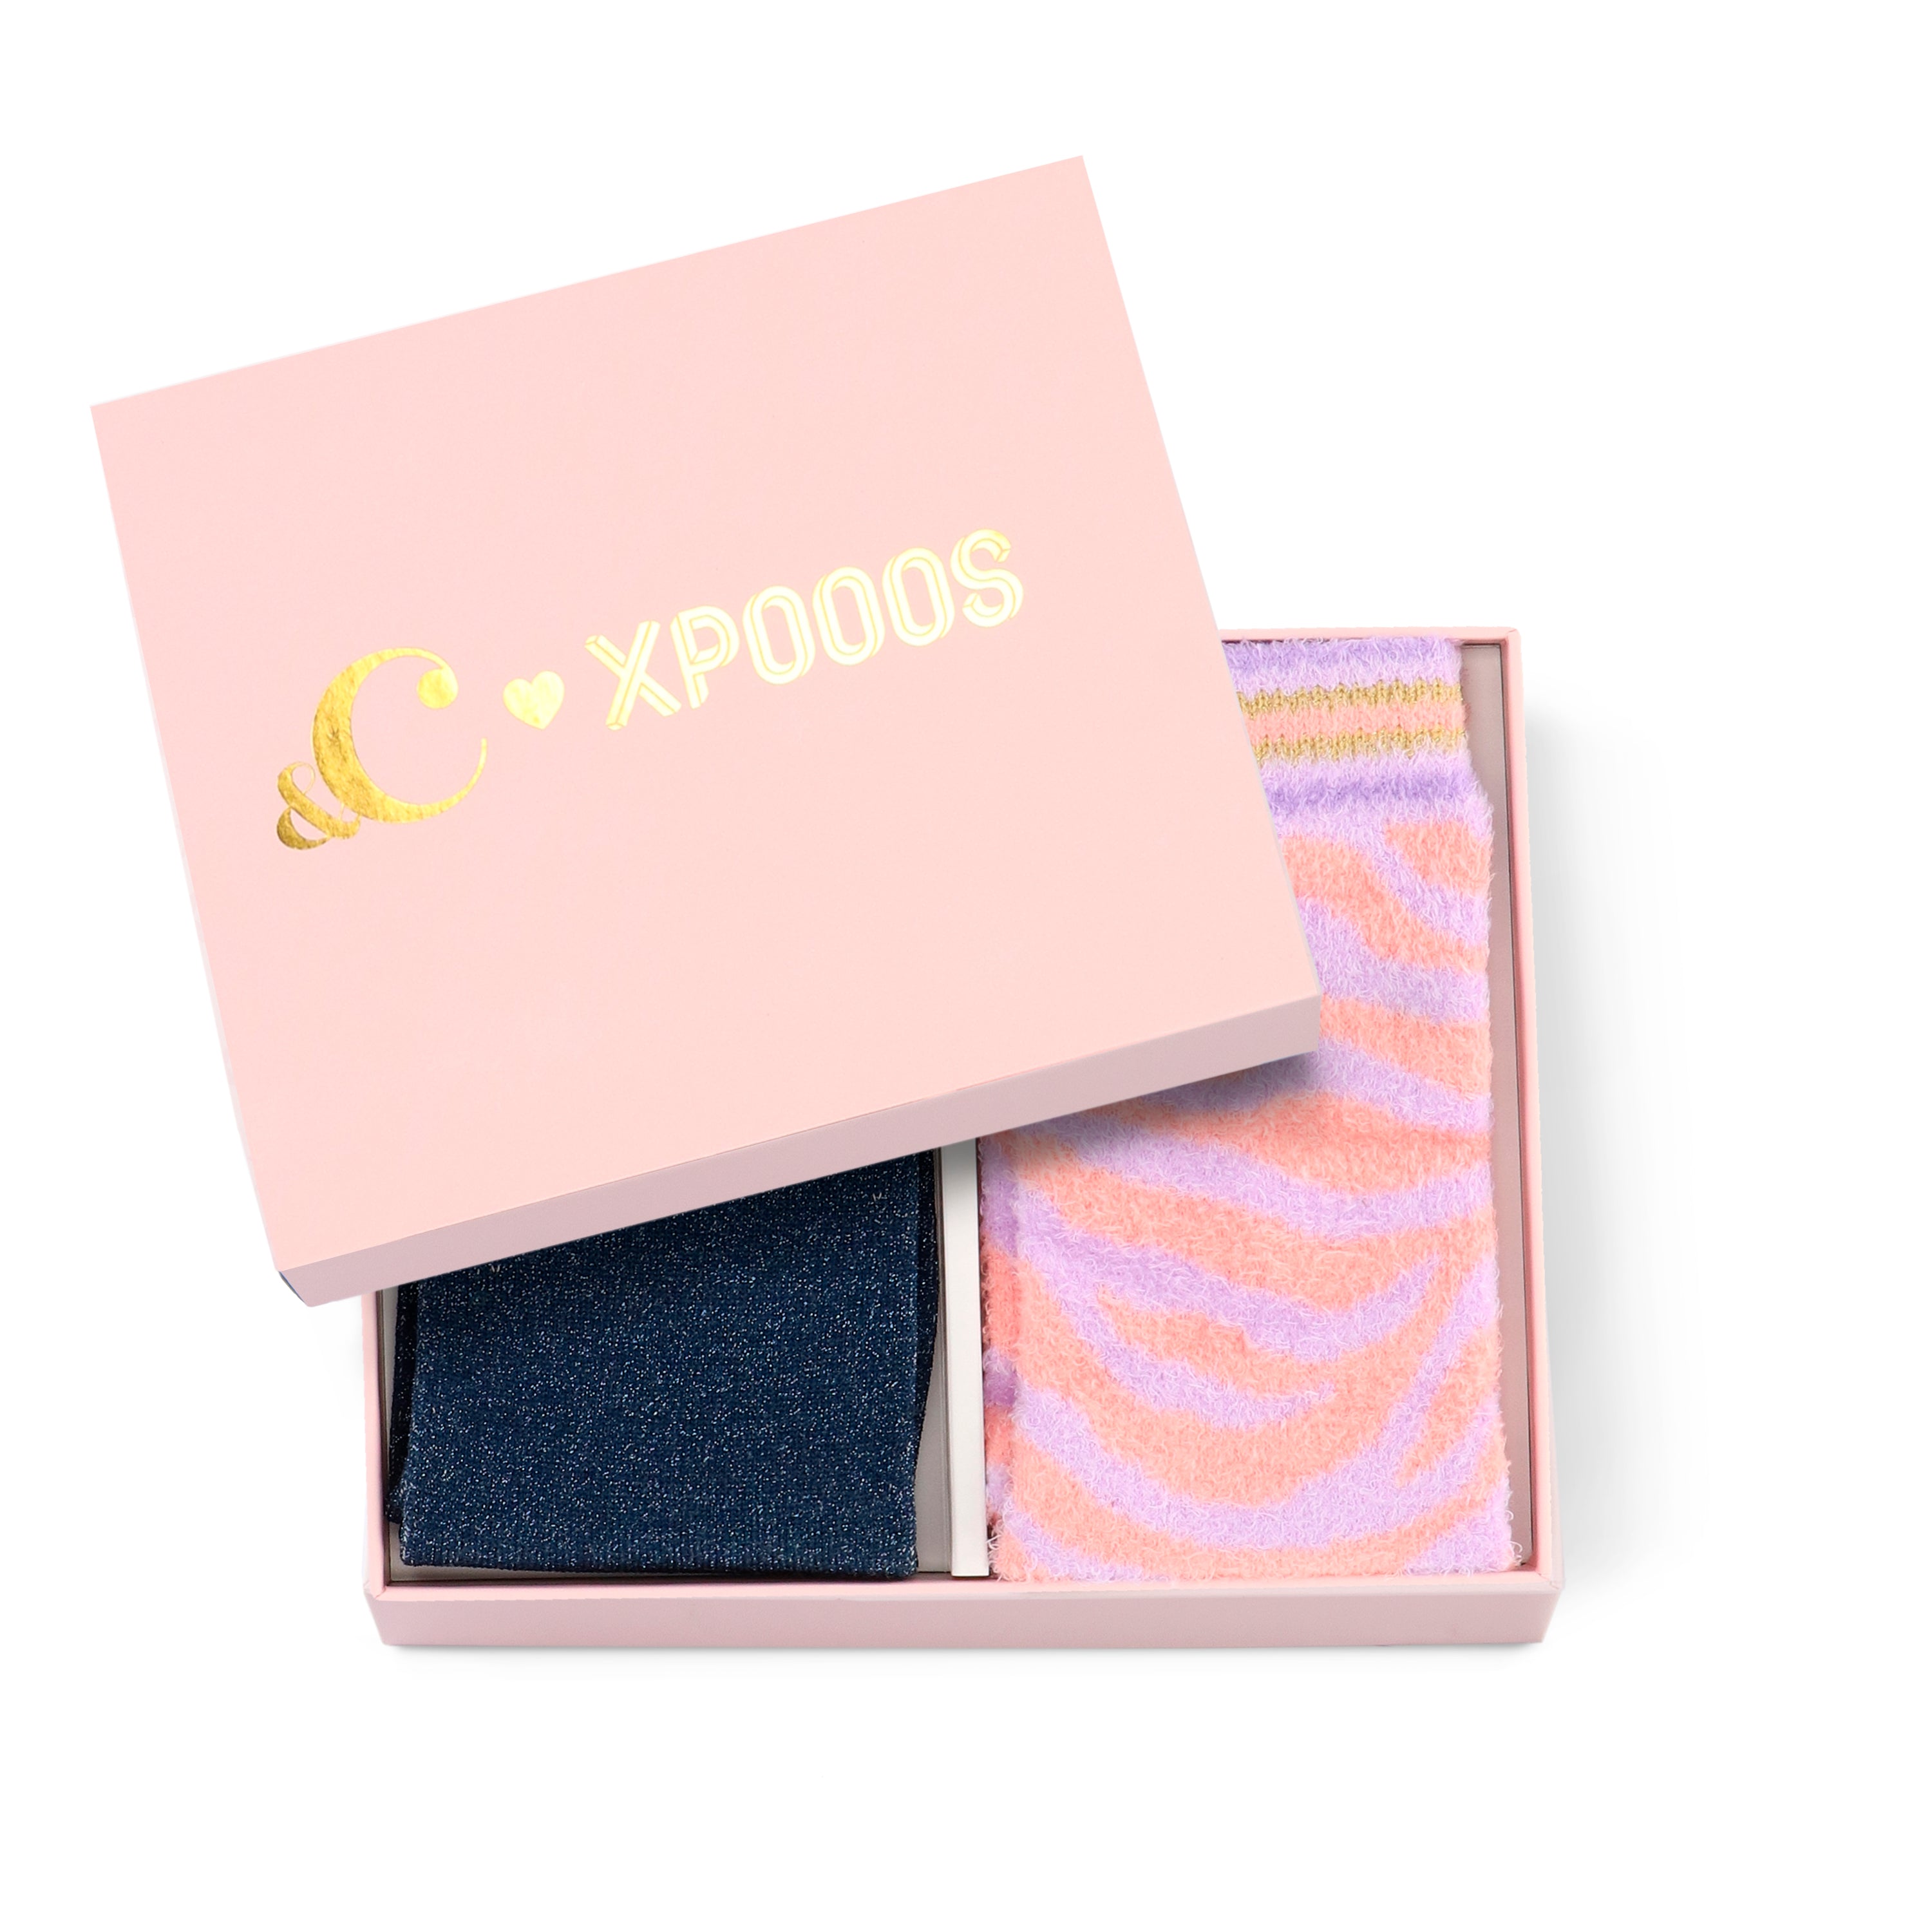 & C × xpooos Giftbox: Glitter & Panther